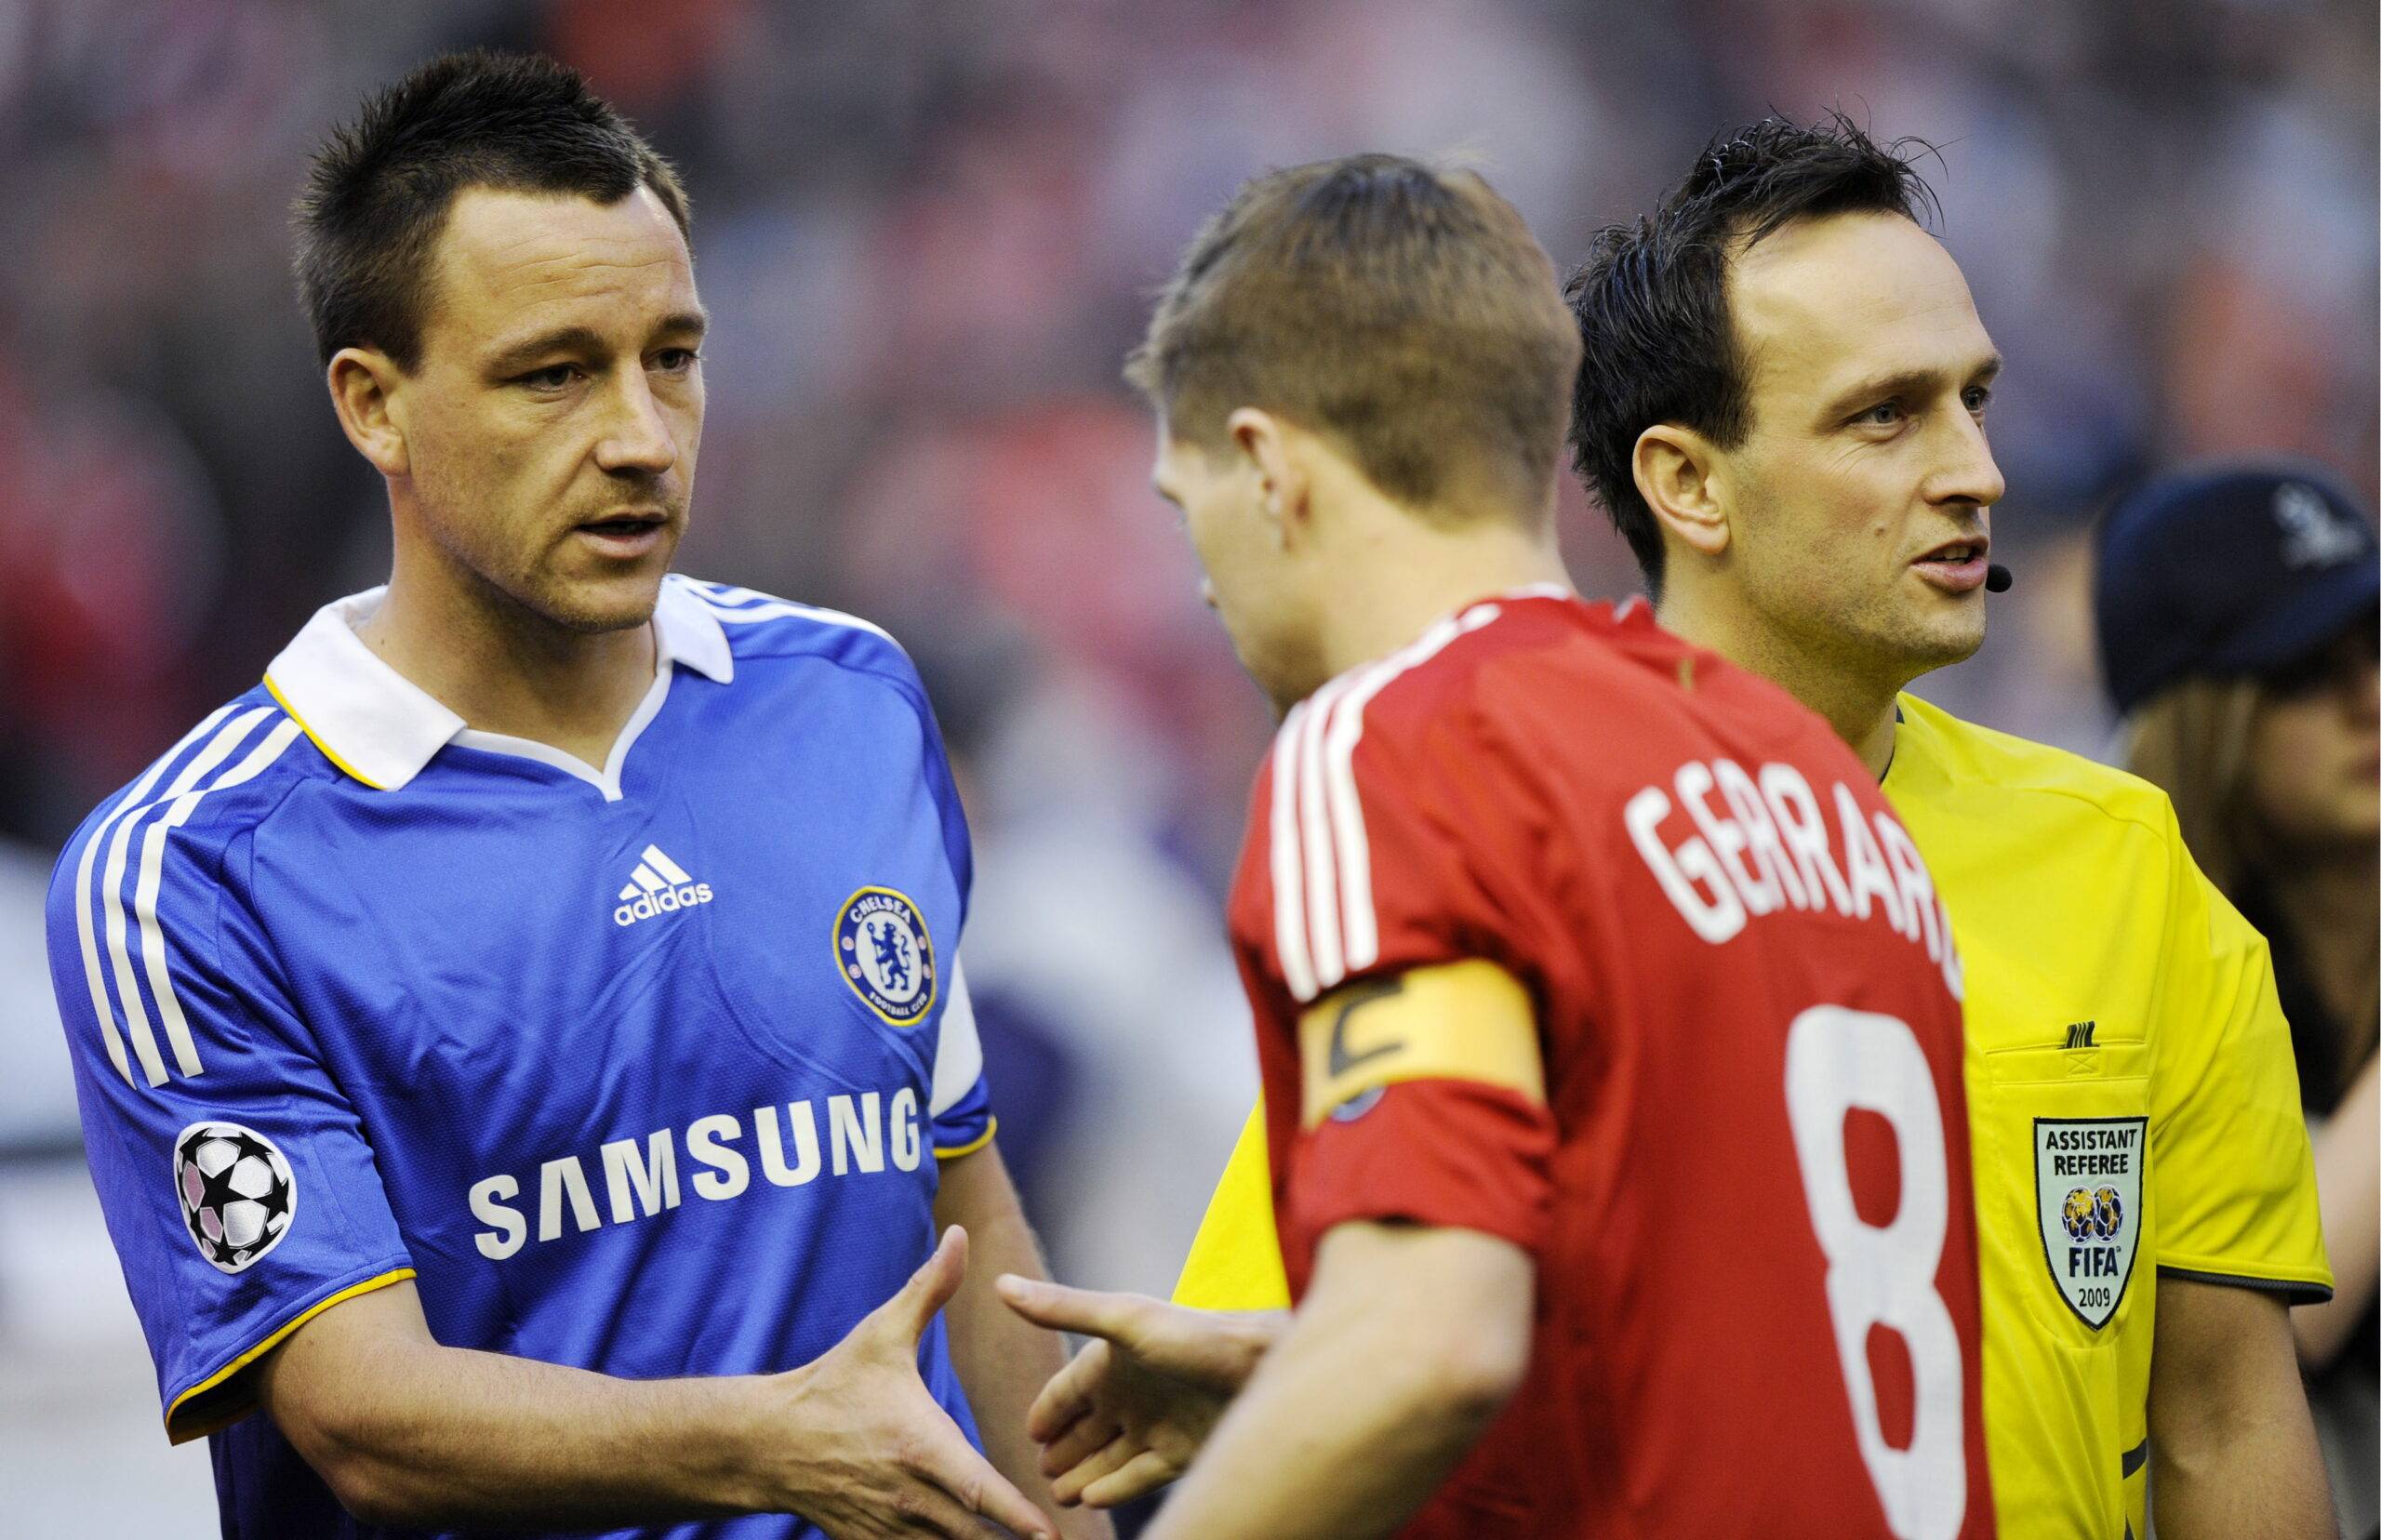 Chelsea's Terry and Liverpool's Gerrard.